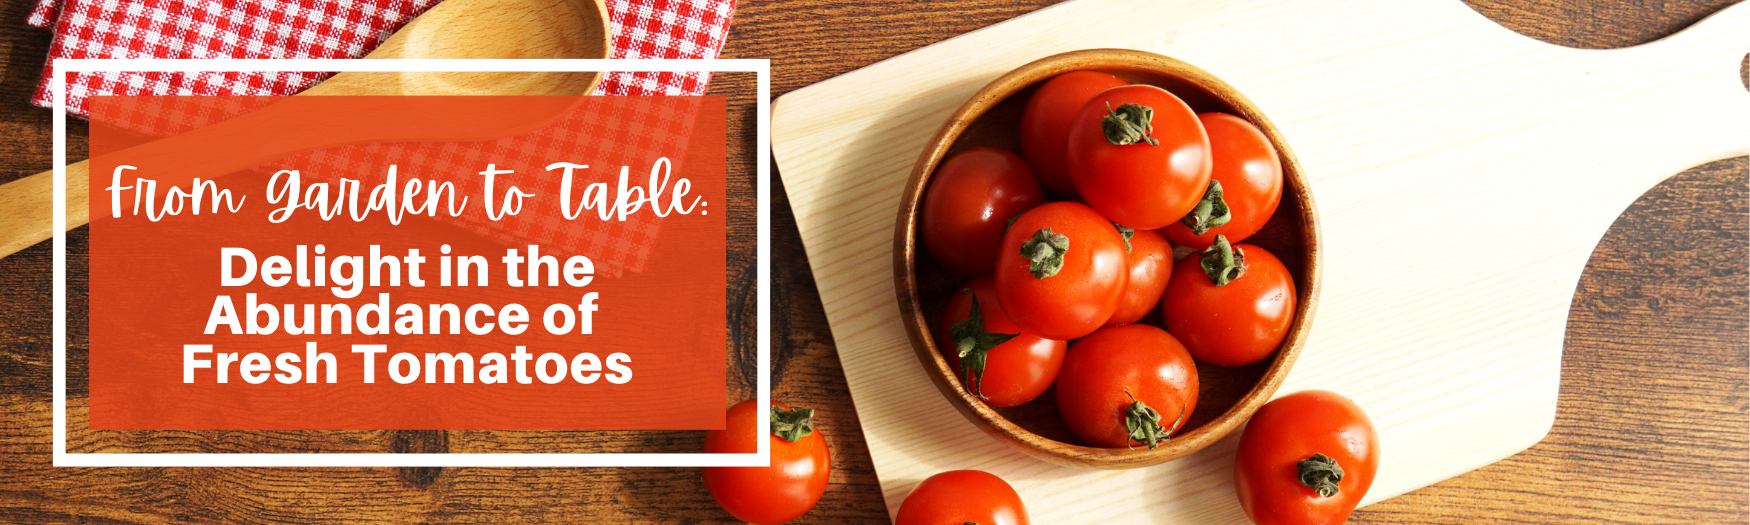 From Garden to Table: Delight in the Abundance of Fresh Tomatoes